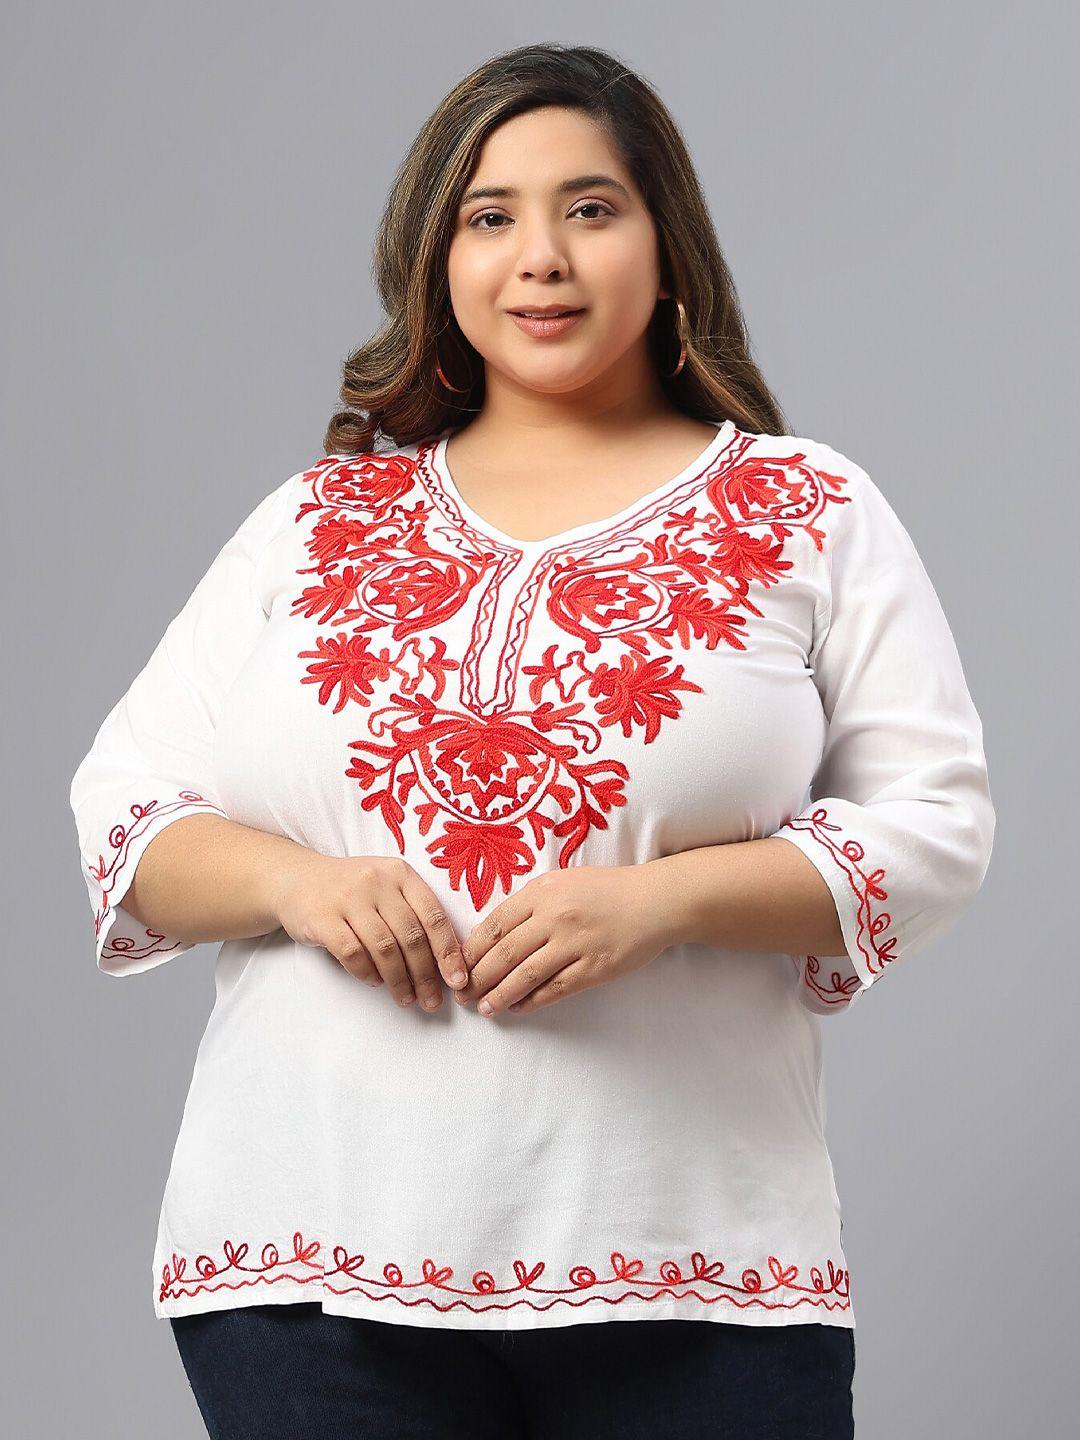 saakaa-plus-size-floral-embroidered-v-neck-cotton-top